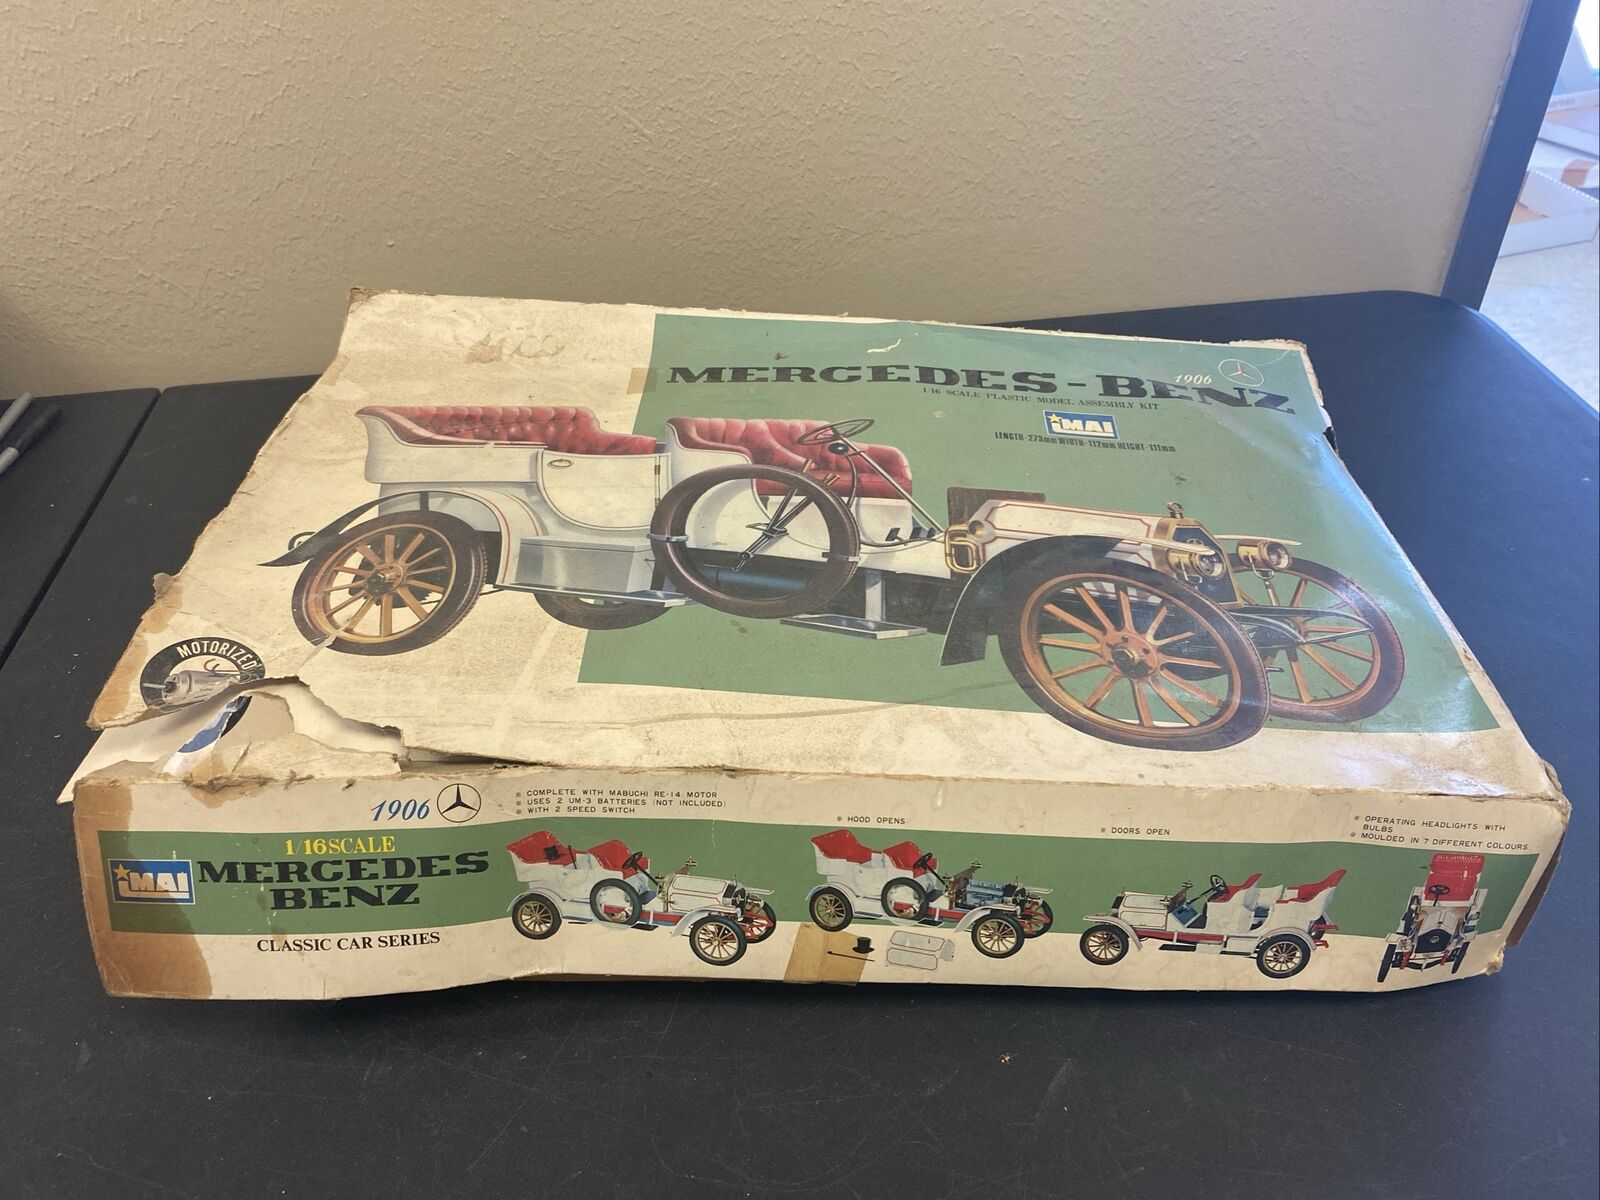 Vintage IMAI 1/16th SCALE 1906 Mercedes-Benz MODEL KIT SOLD AS-IS